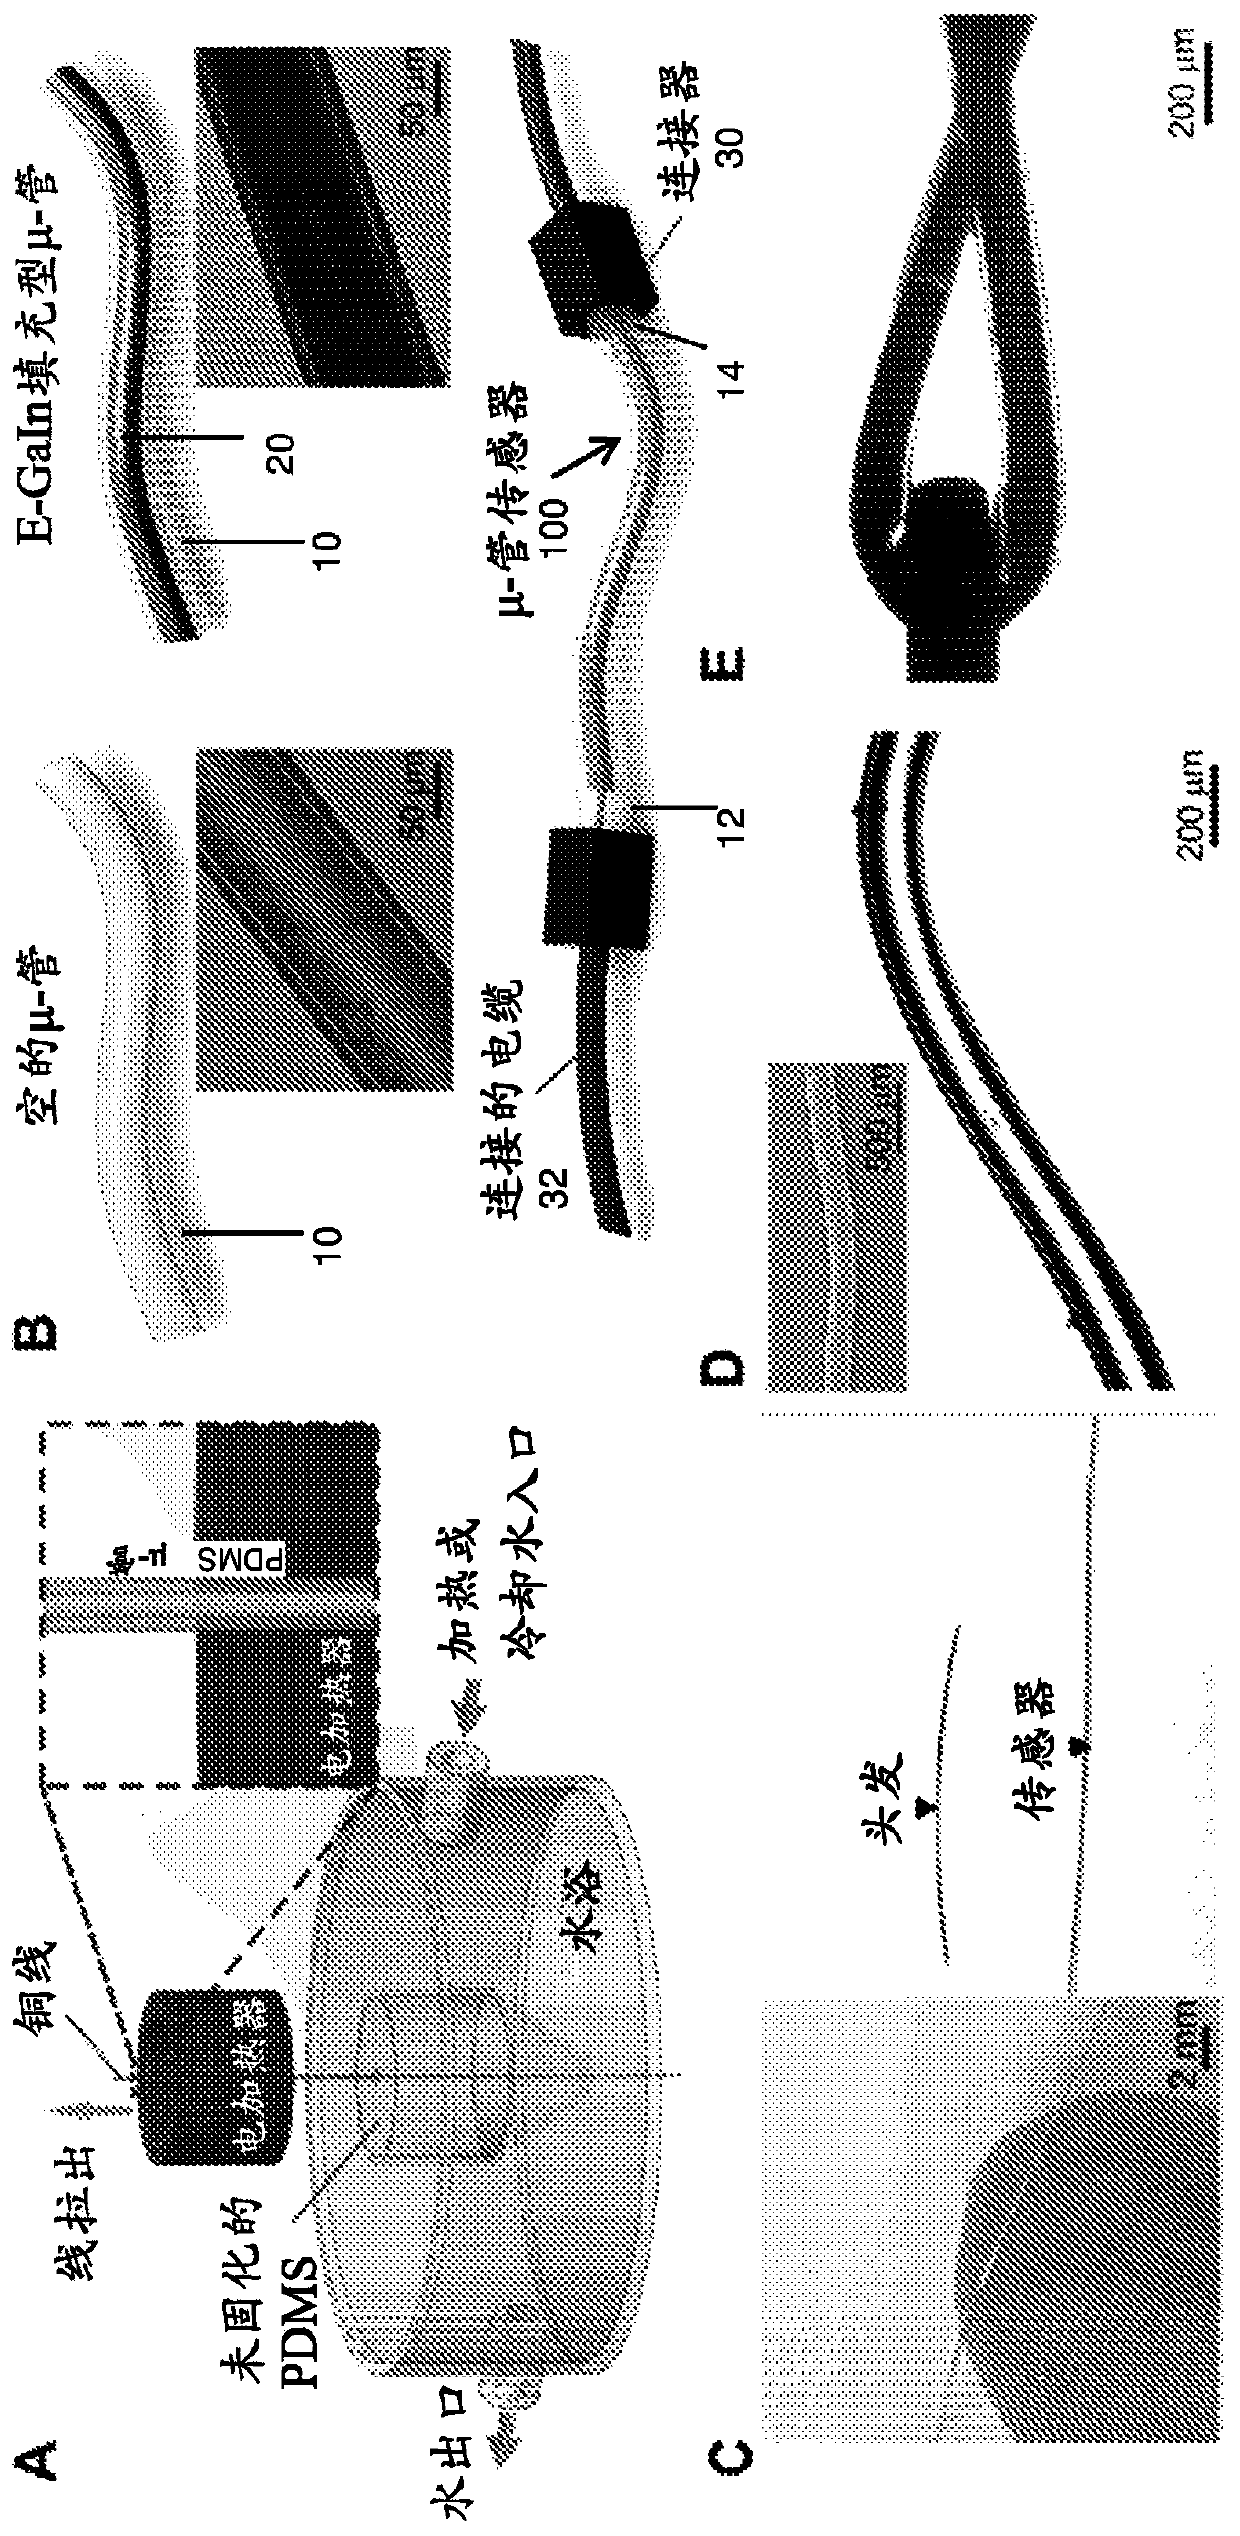 Microtube sensor for physiological monitoring